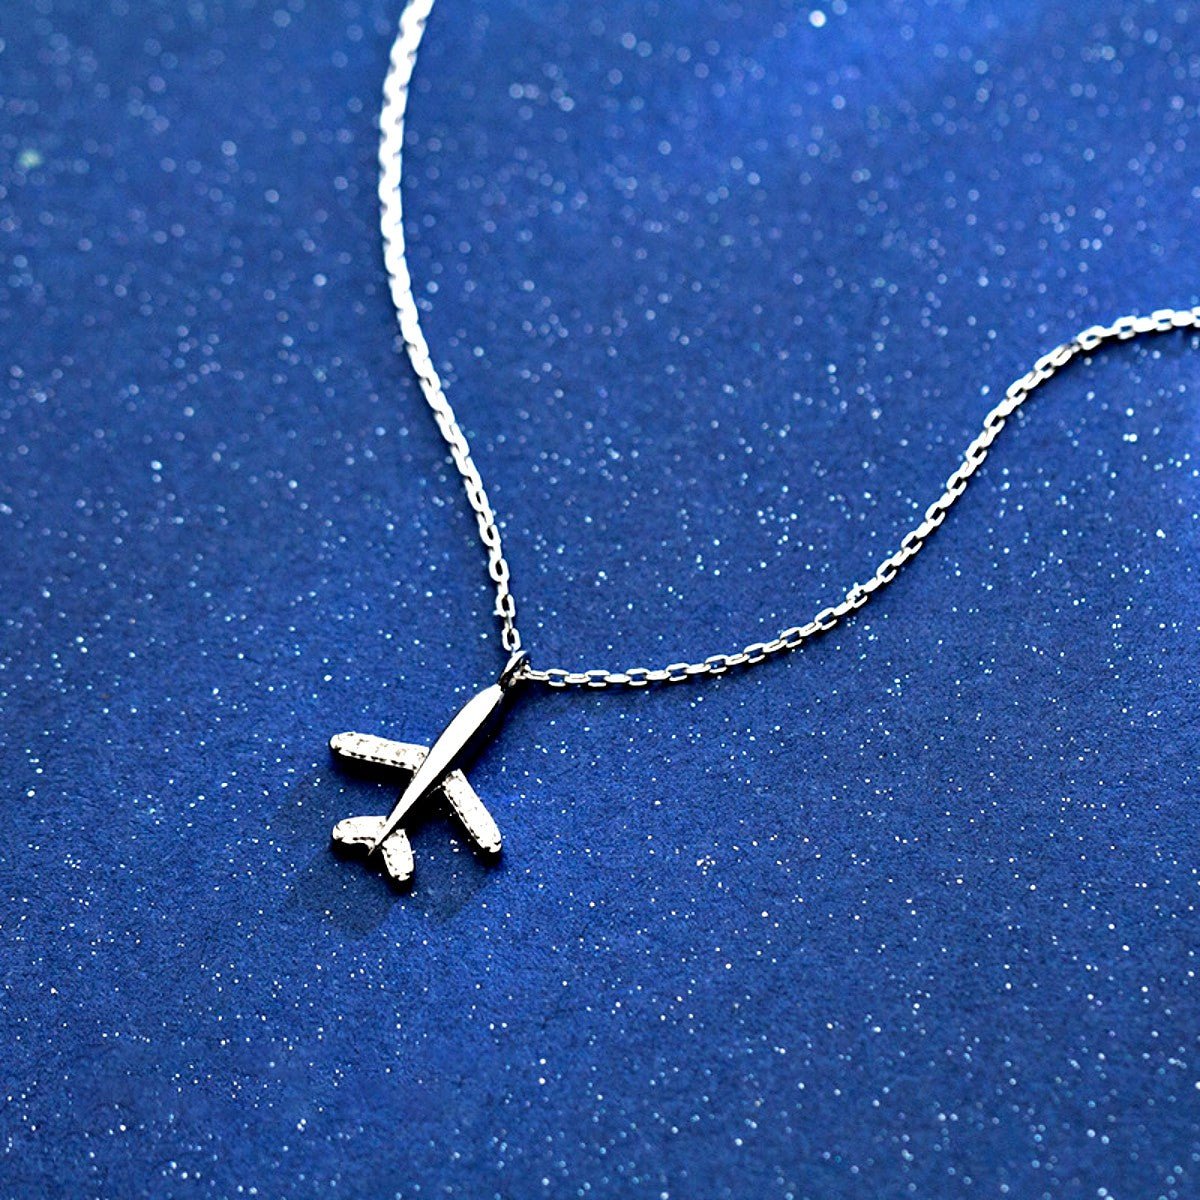 Airplane Necklace